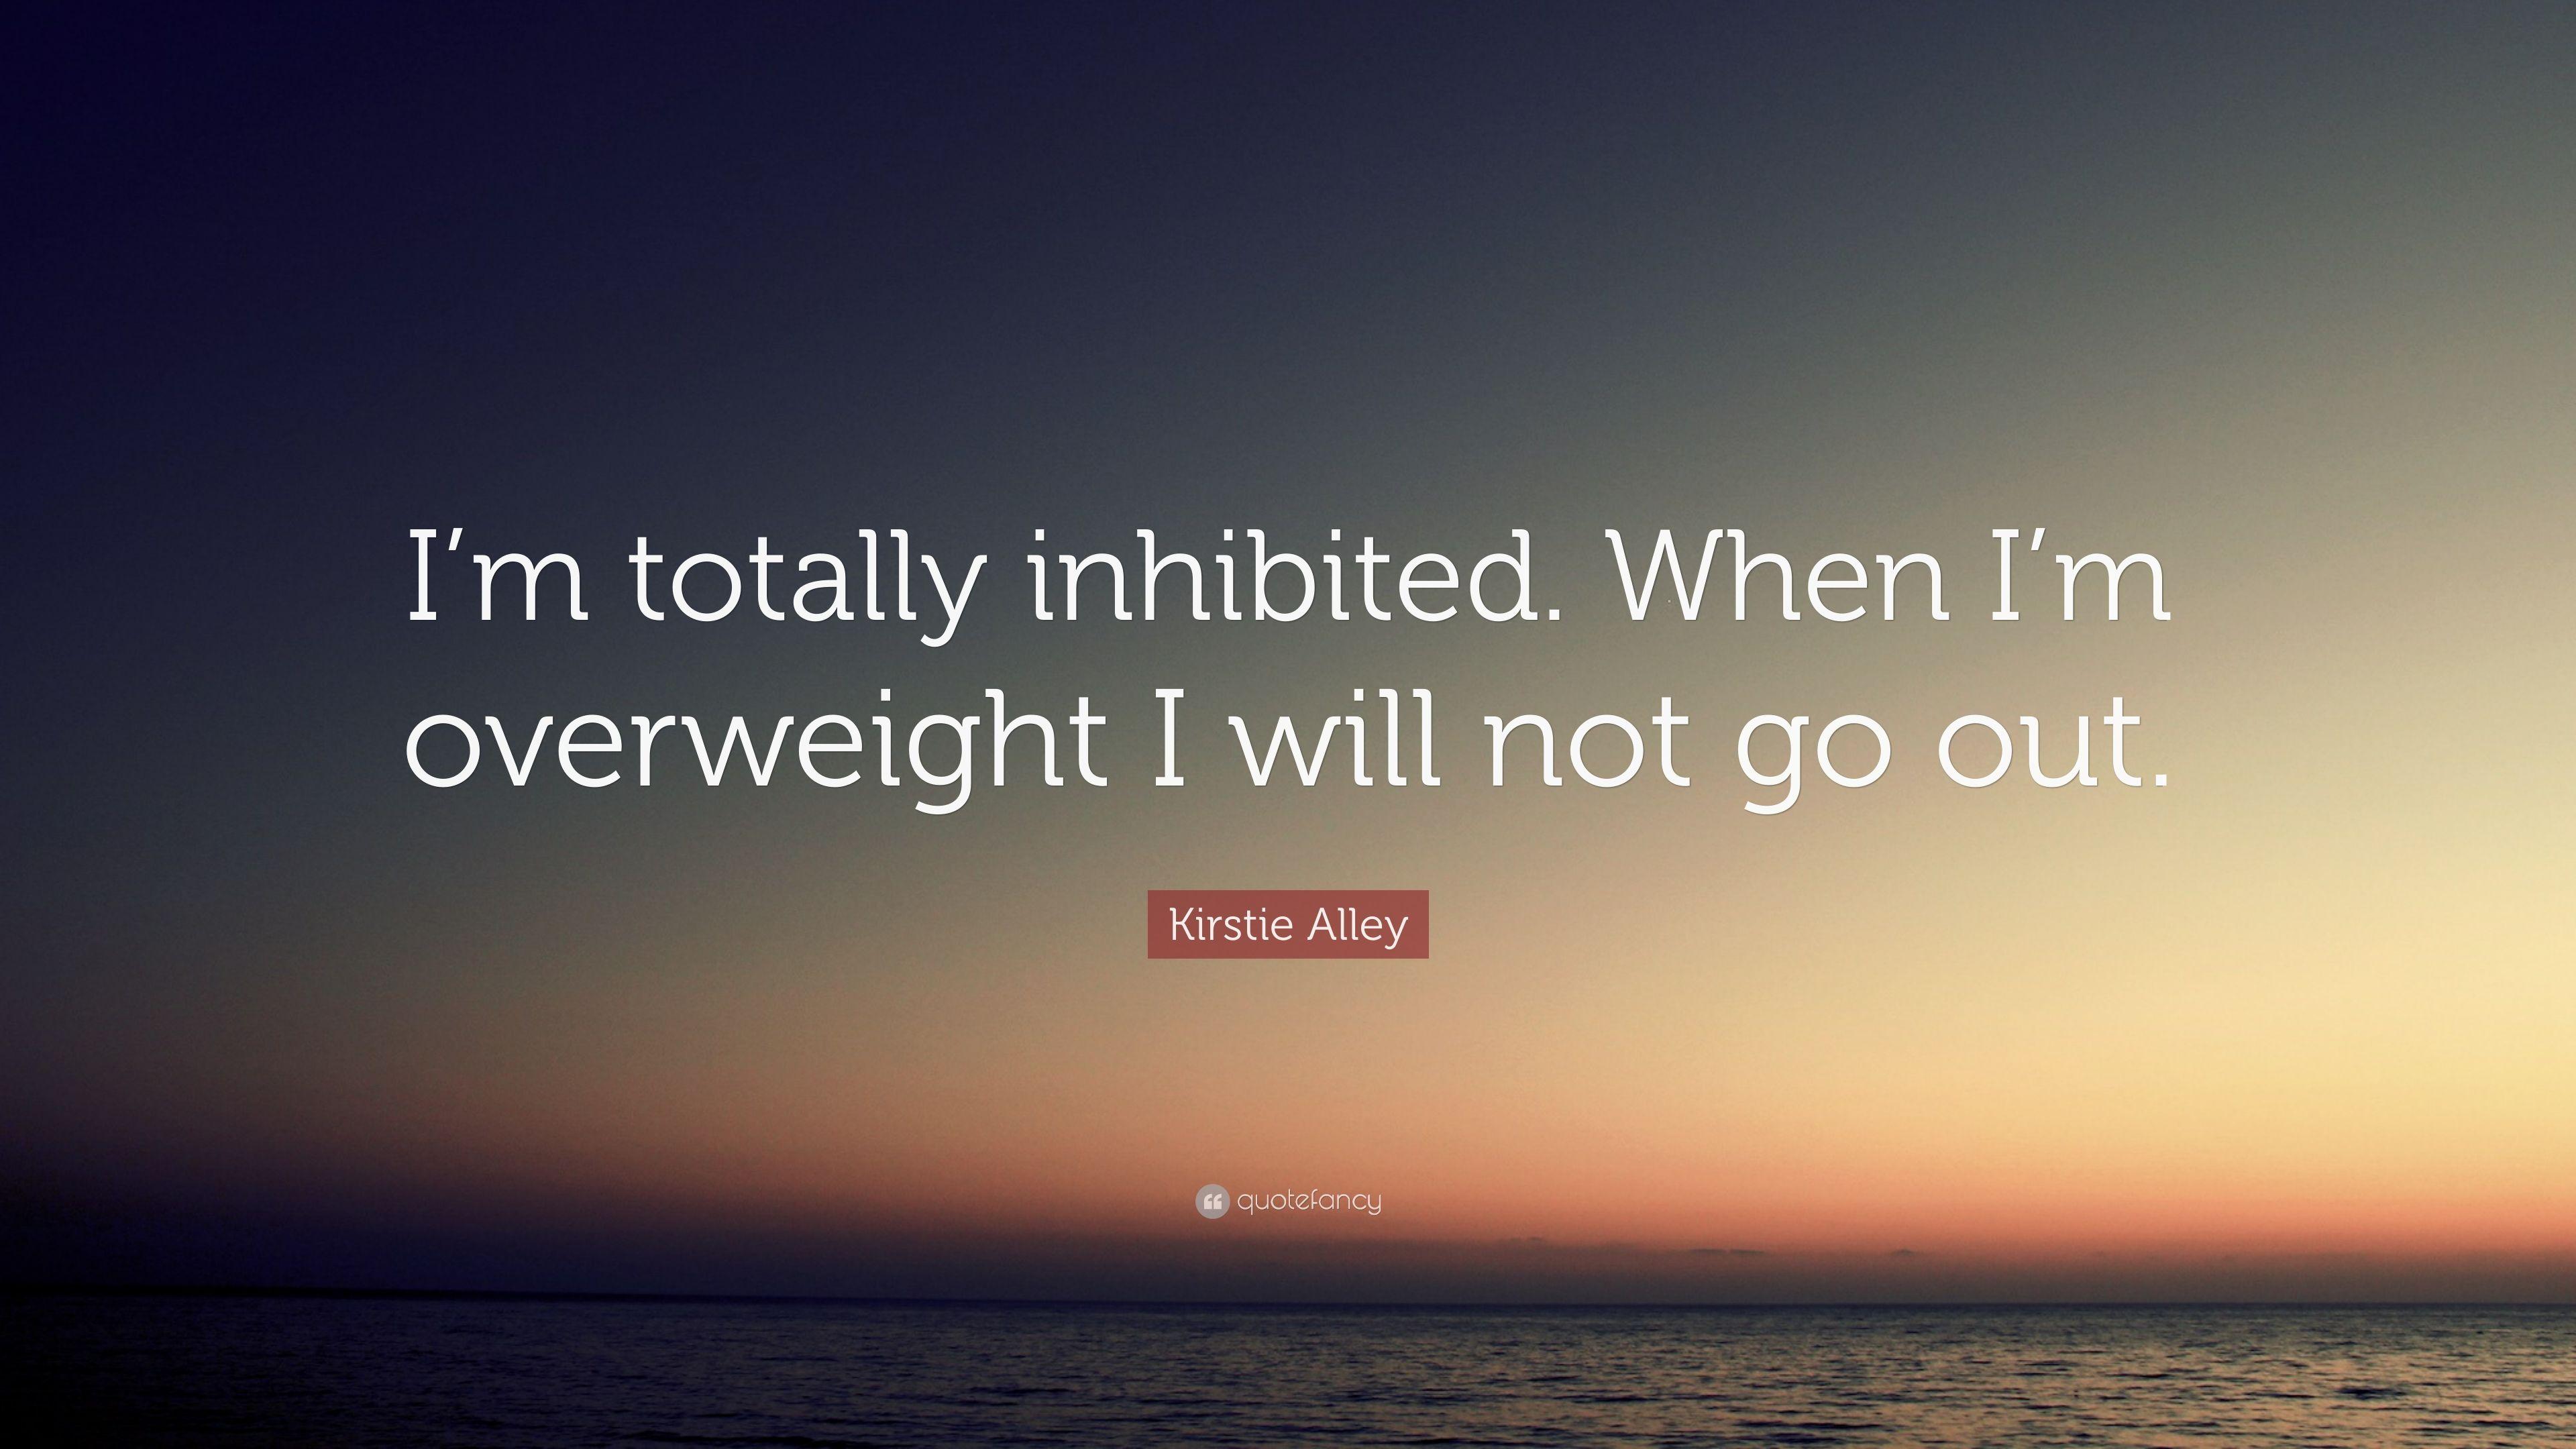 Kirstie Alley Quote: “I'm totally inhibited. When I'm